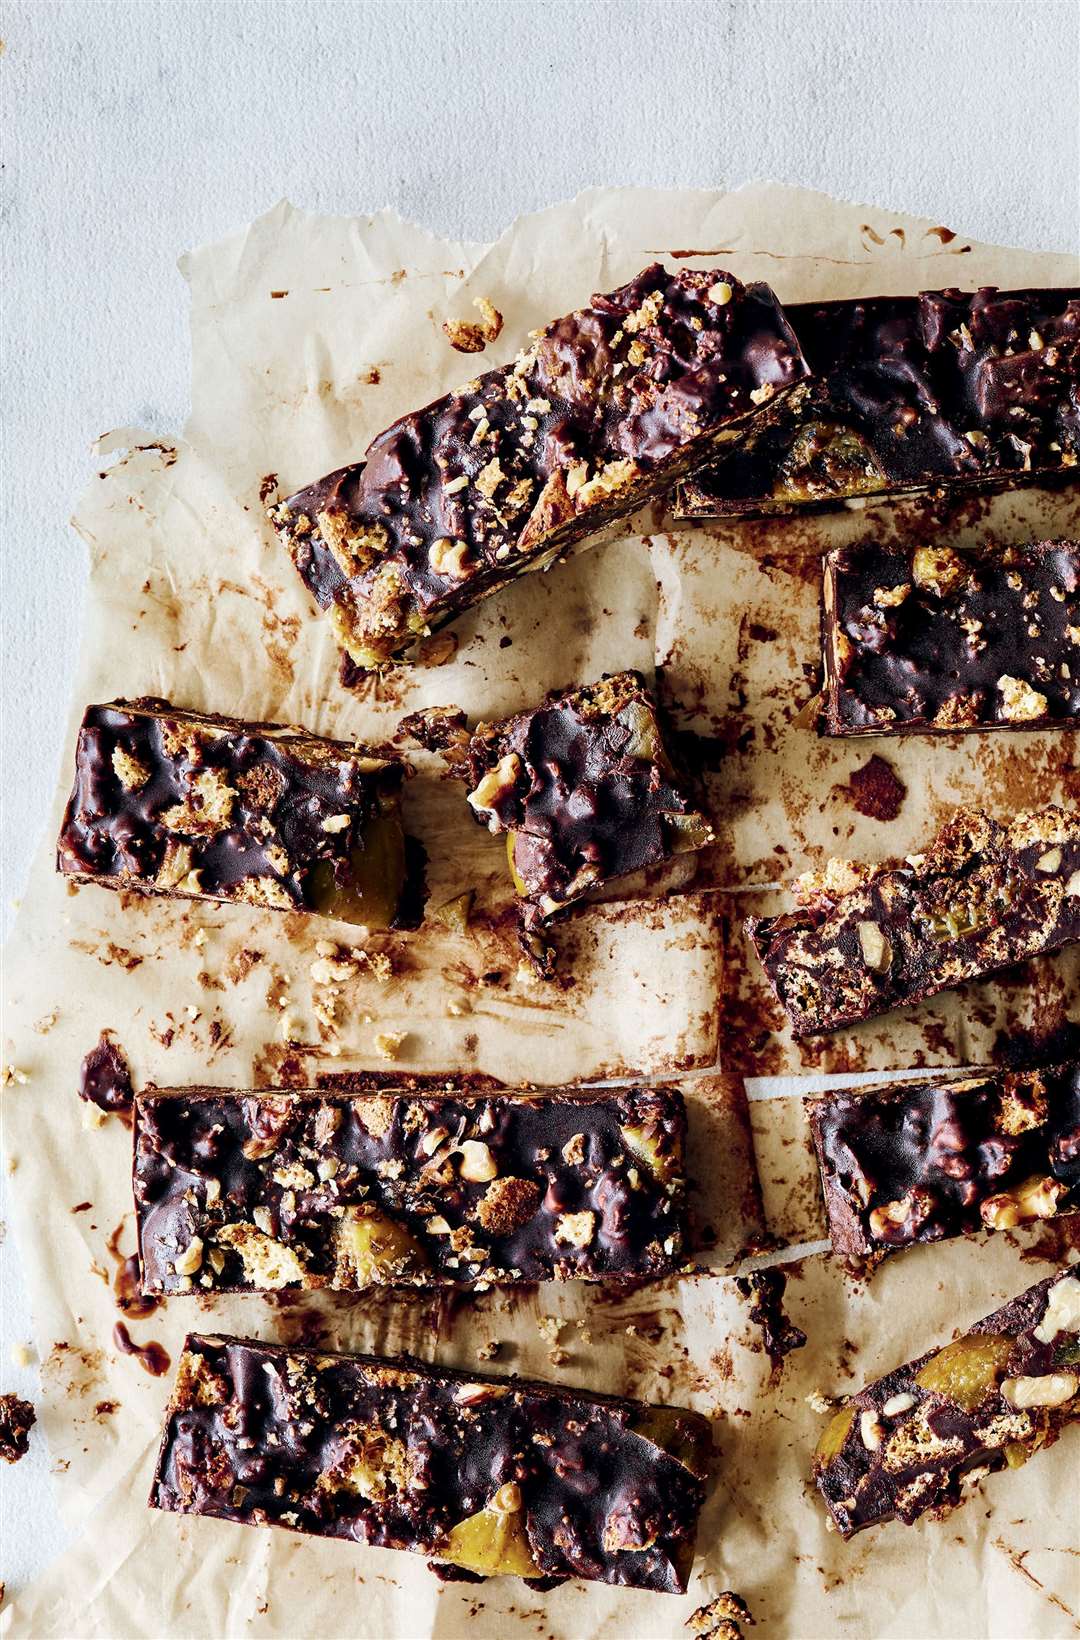 Lola Milne's rocky road with figs and walnuts from the cookbook Take One Tin. Picture: Lizzie Mayson/PA